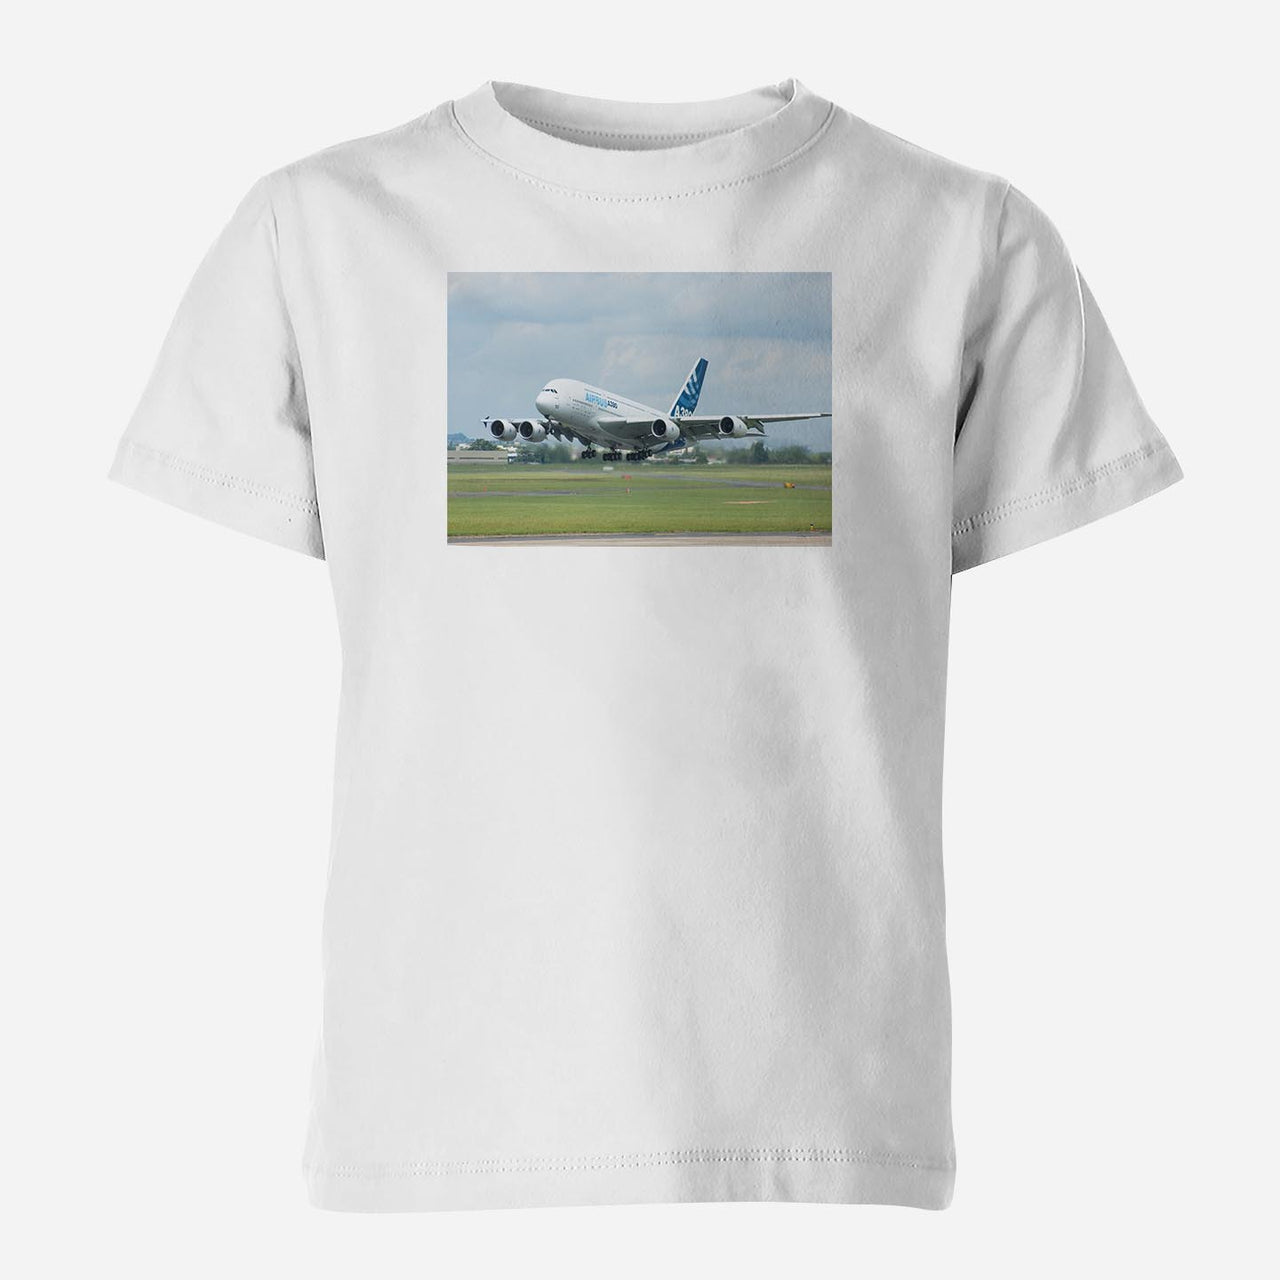 Departing Airbus A380 with Original Livery Designed Children T-Shirts